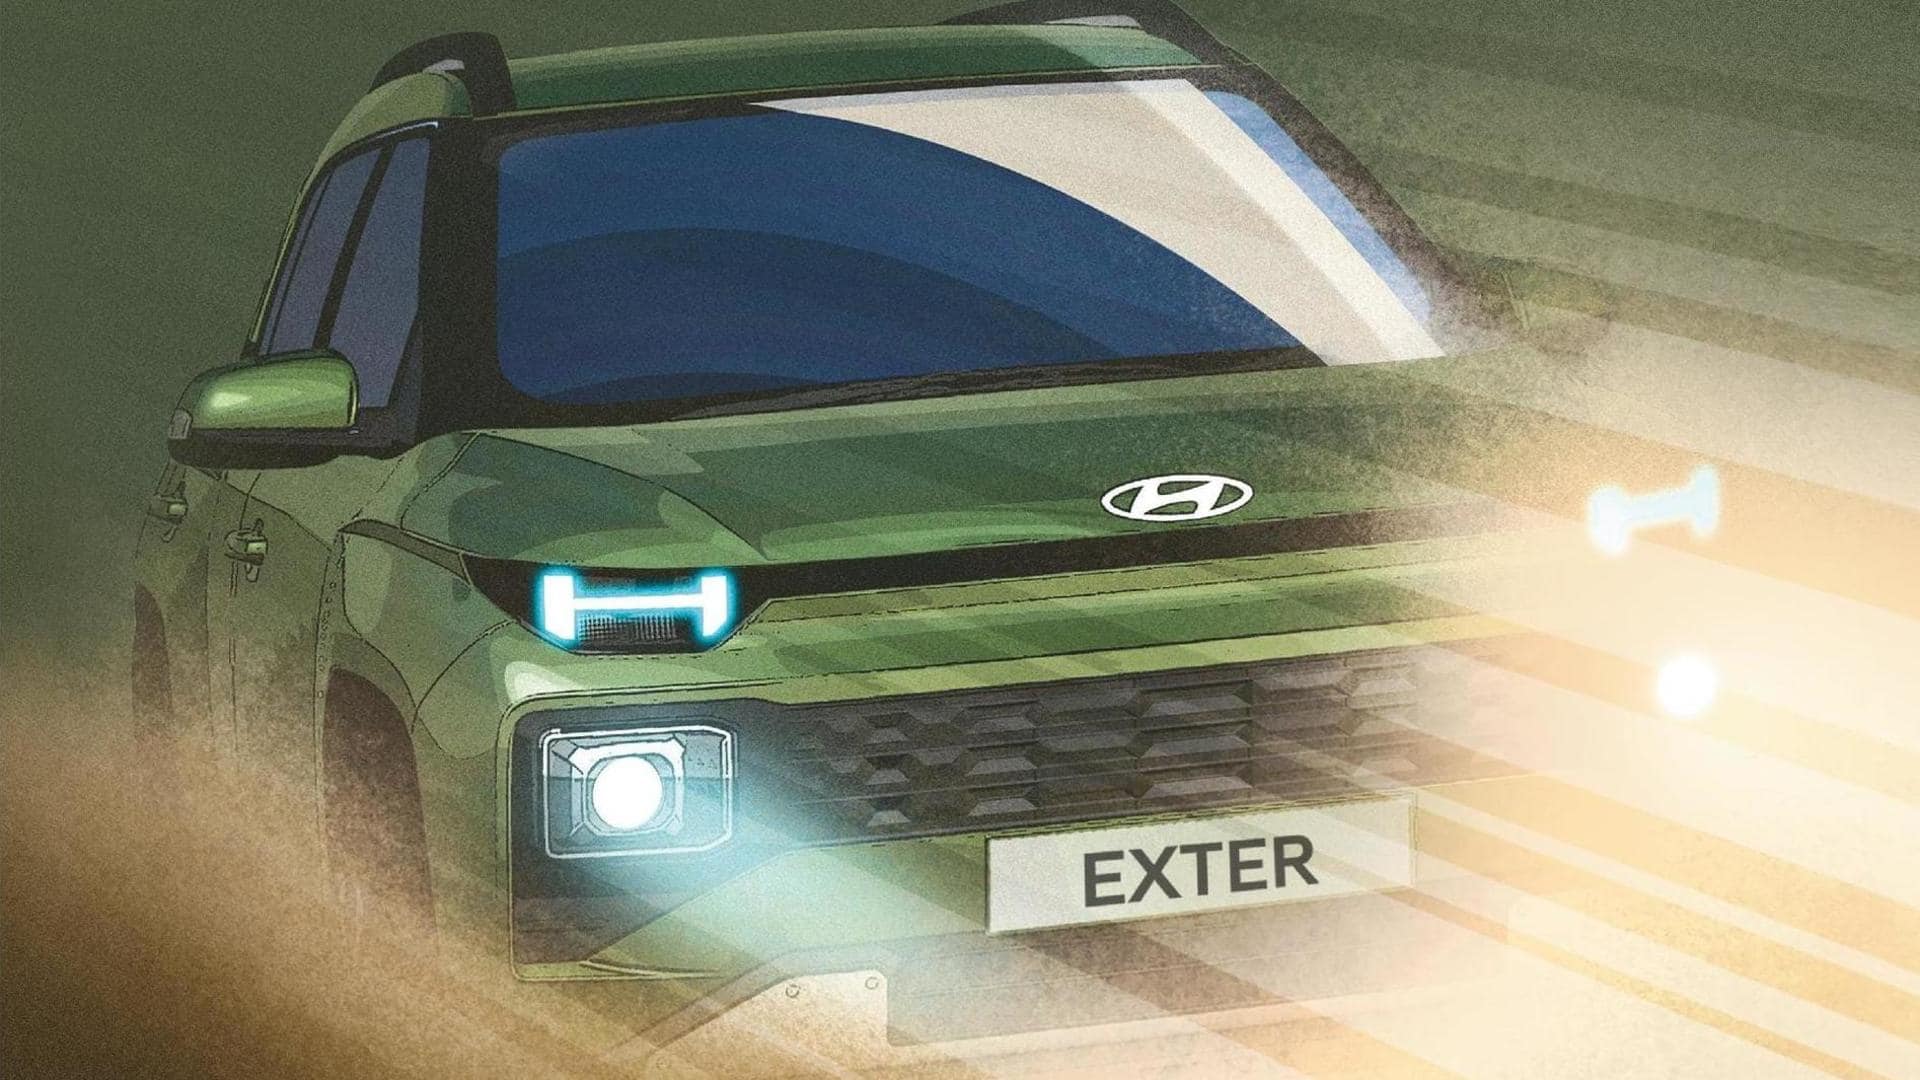 Hyundai EXTER spotted undisguised: Check features of Tata Punch's rival